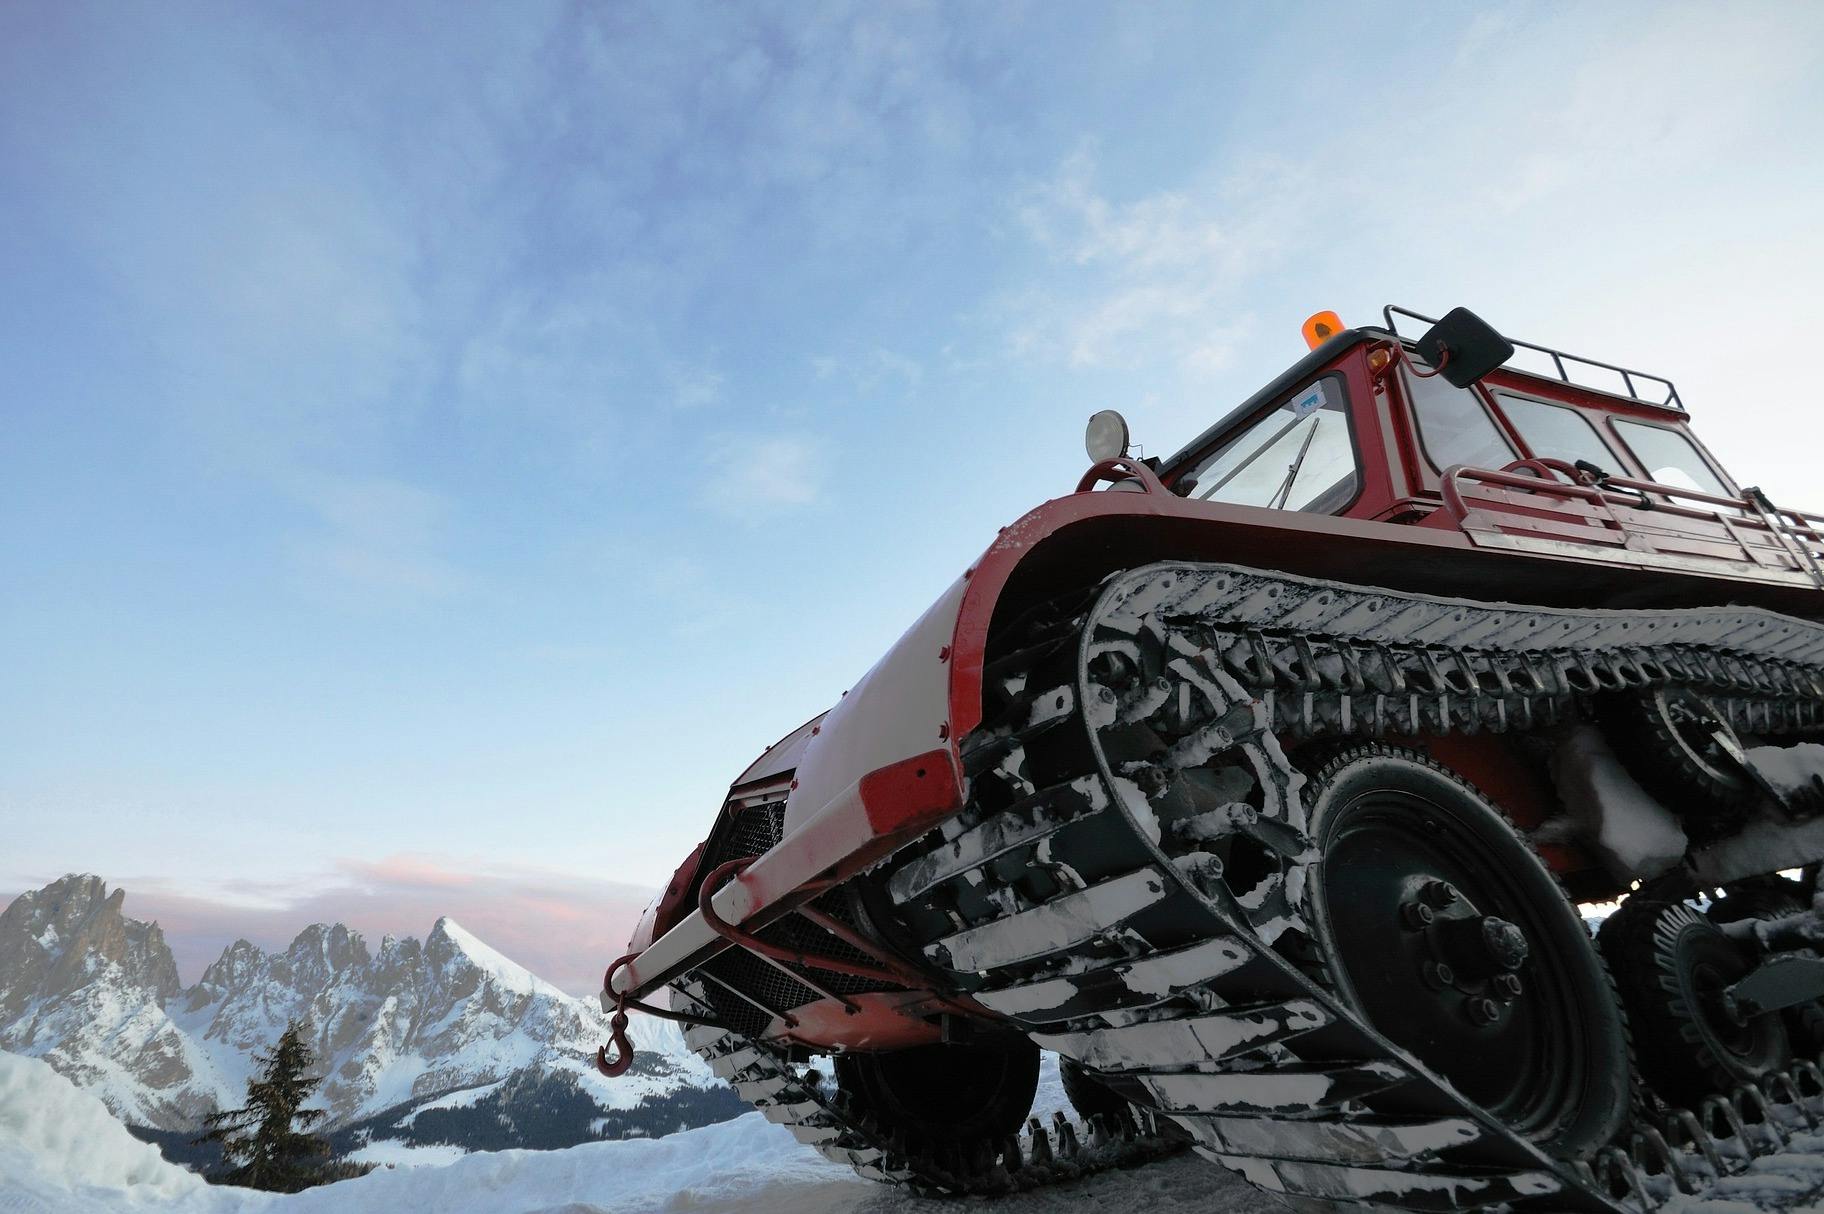 A red snowcat stands tall. In the background, we can see jagged mountain peaks. 